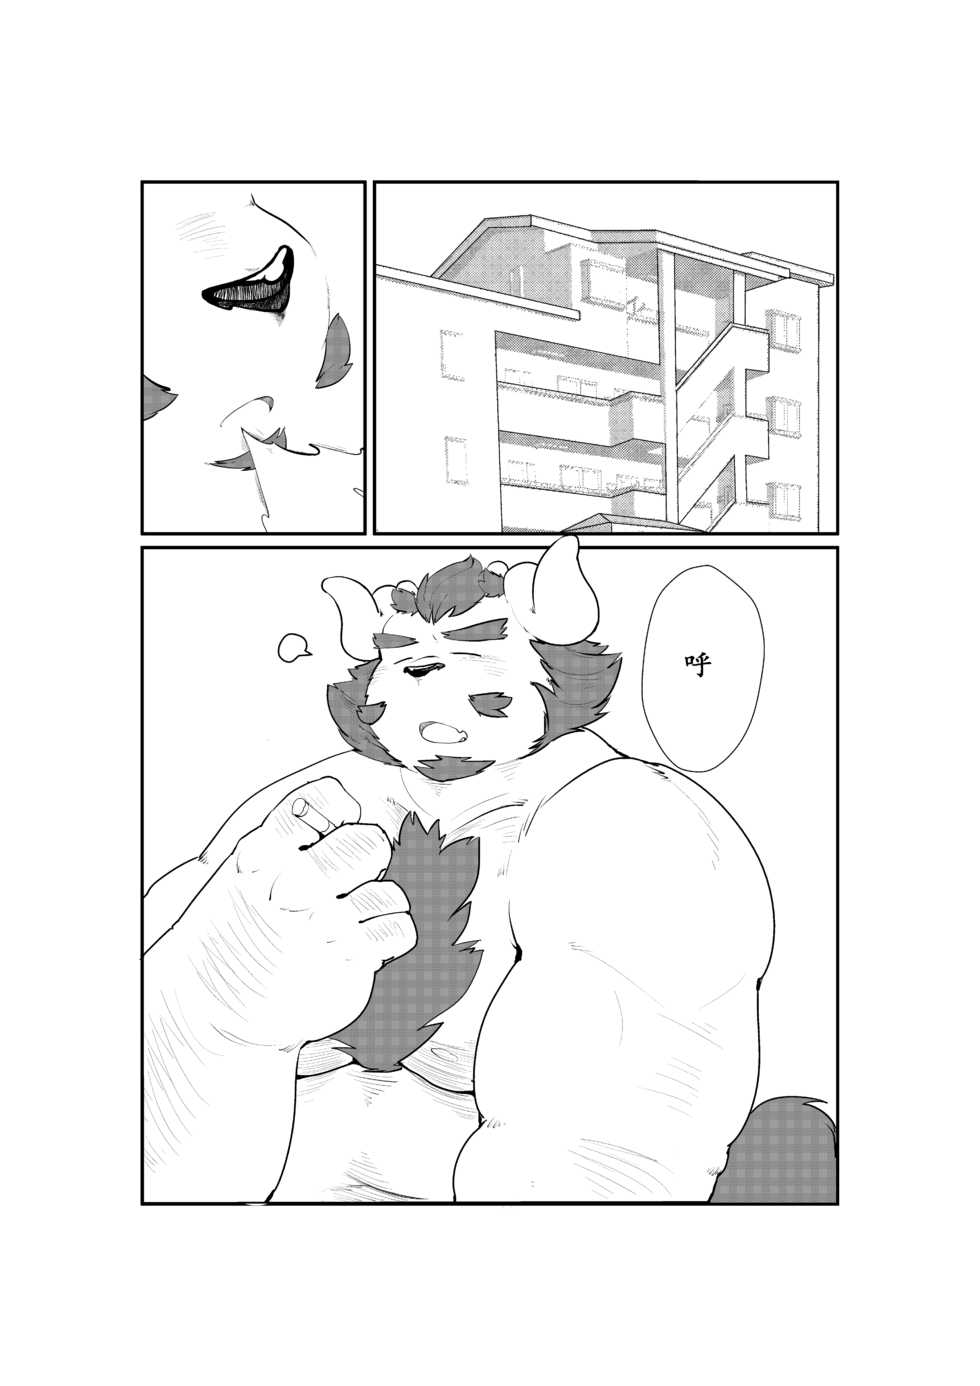 [quanjiang] Adult Stress (Tokyo Afterschool Summoners) - Page 2